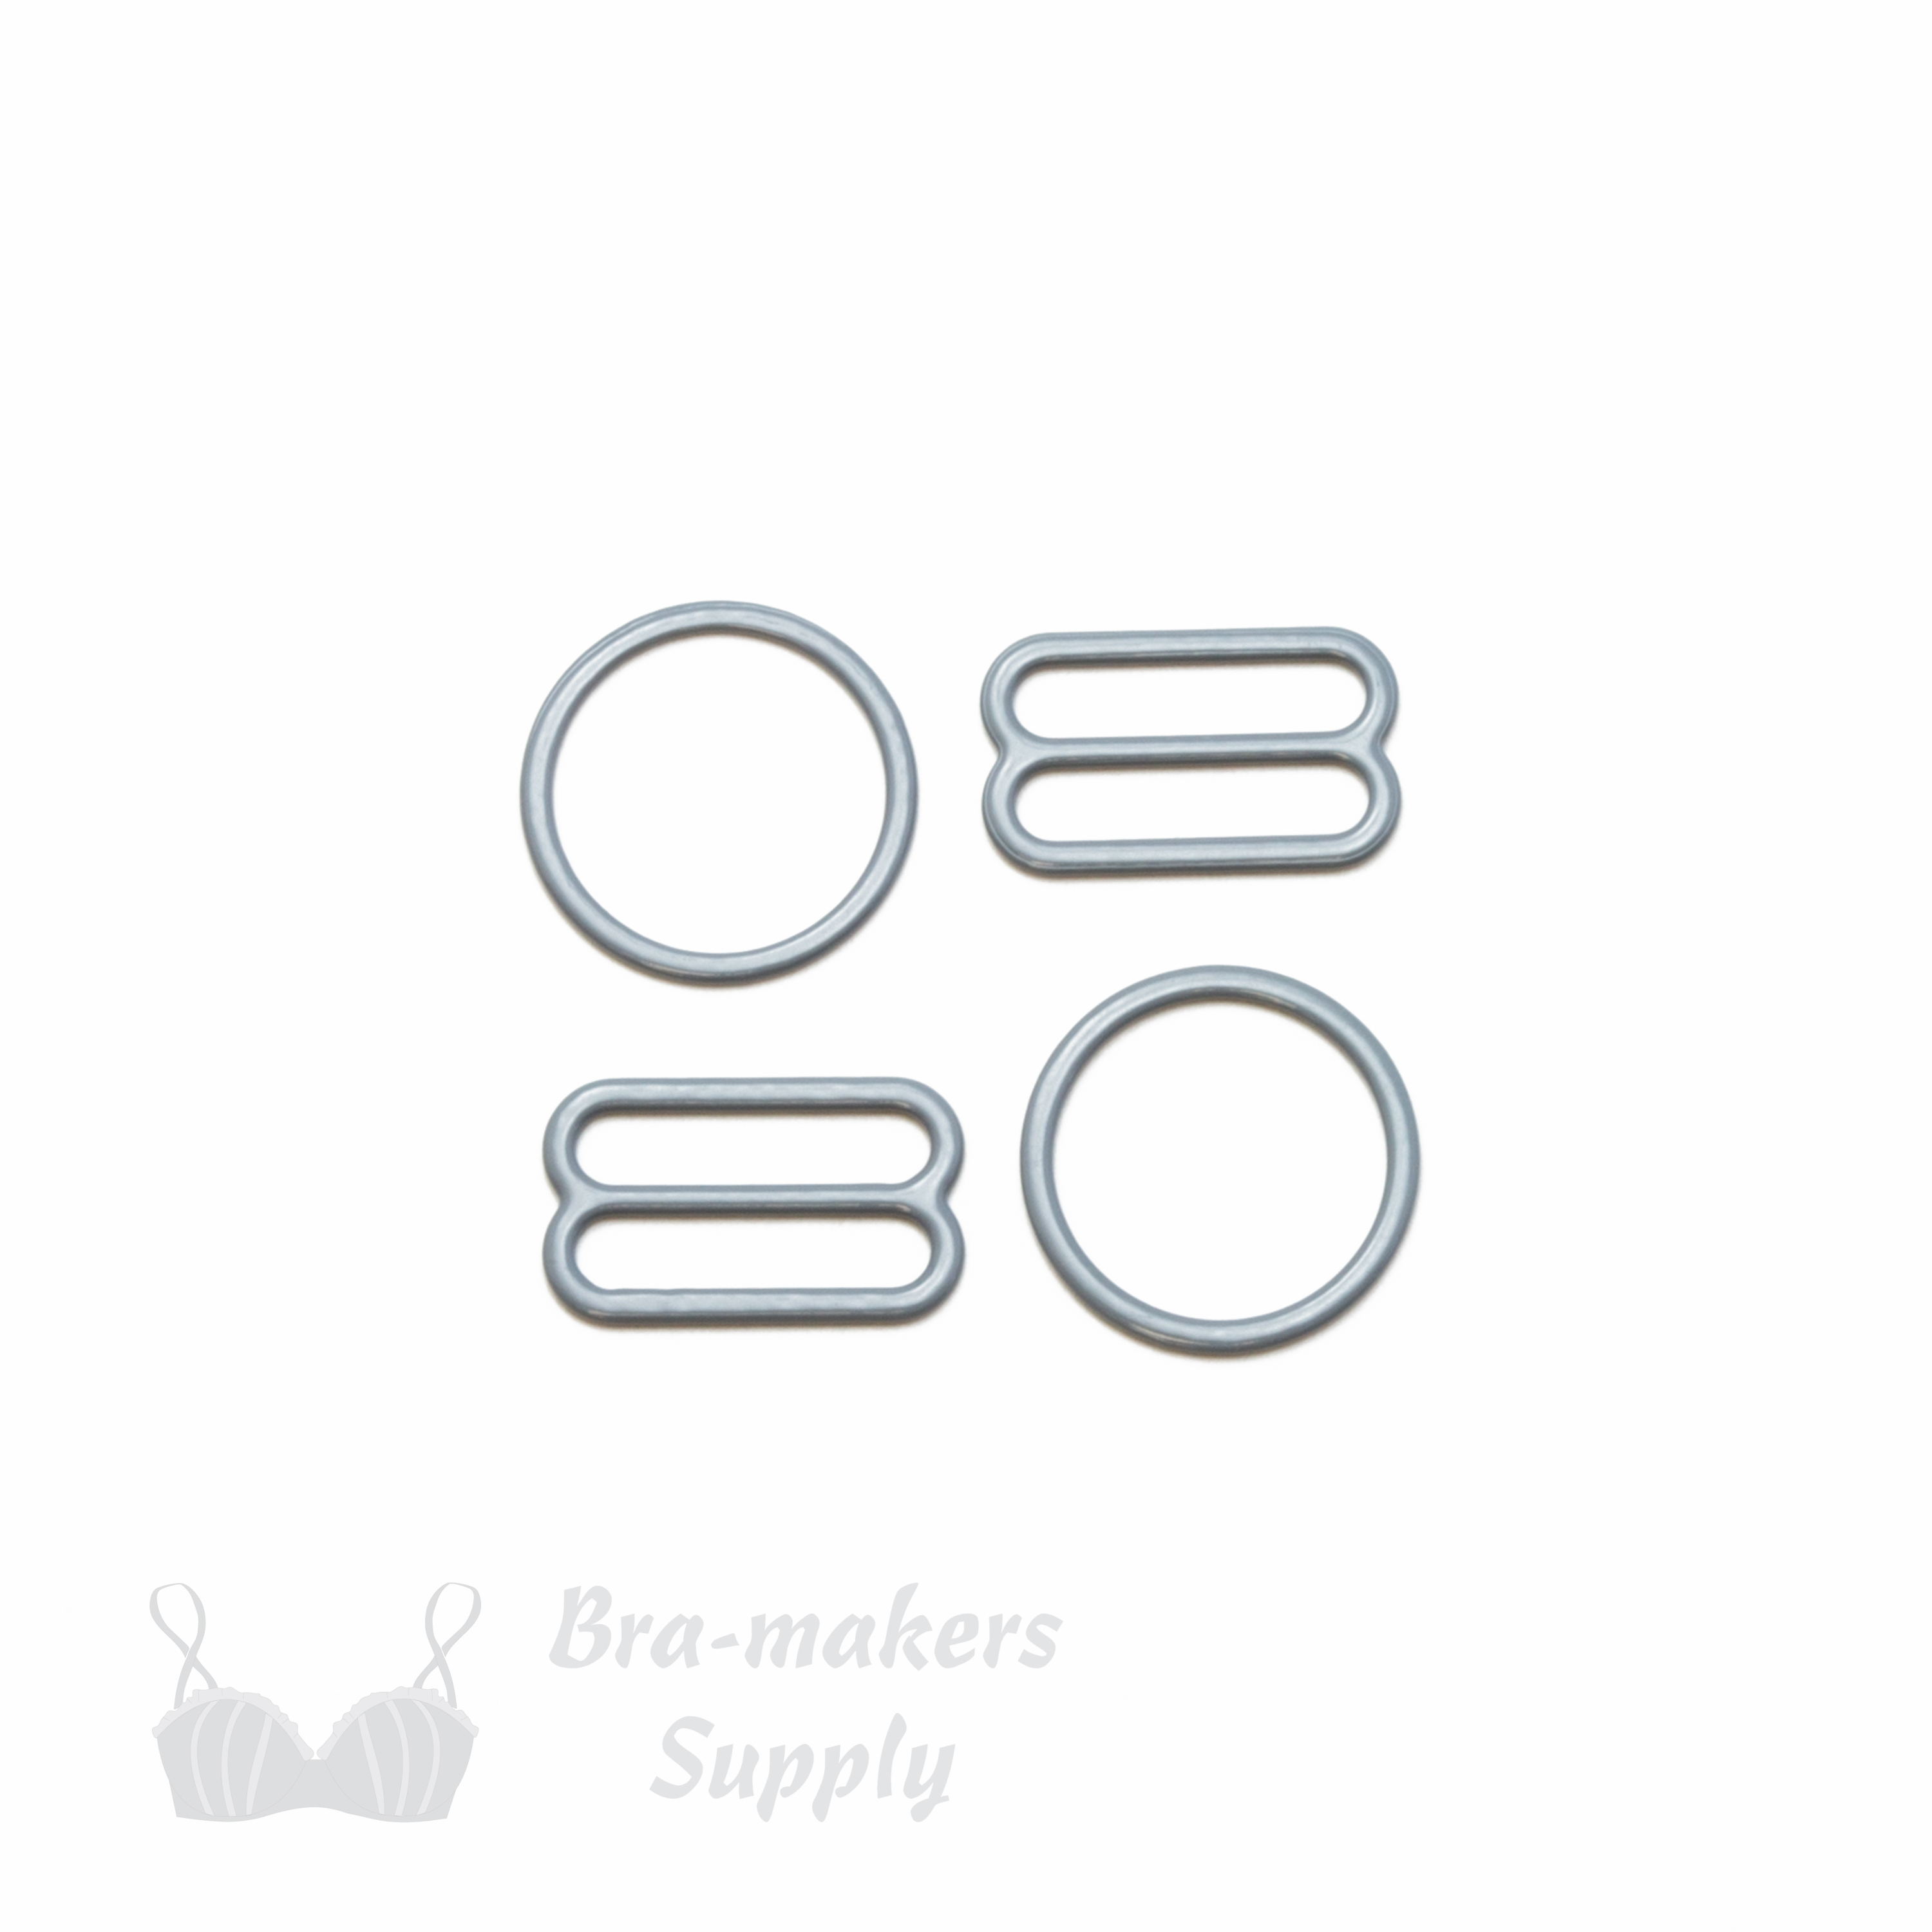 five eighths inch 16mm RM-6 platinum nylon coated metal rings sliders or griffin Pantone 17-5102 from Bra-Makers Supply 2 sliders 2 rings shown